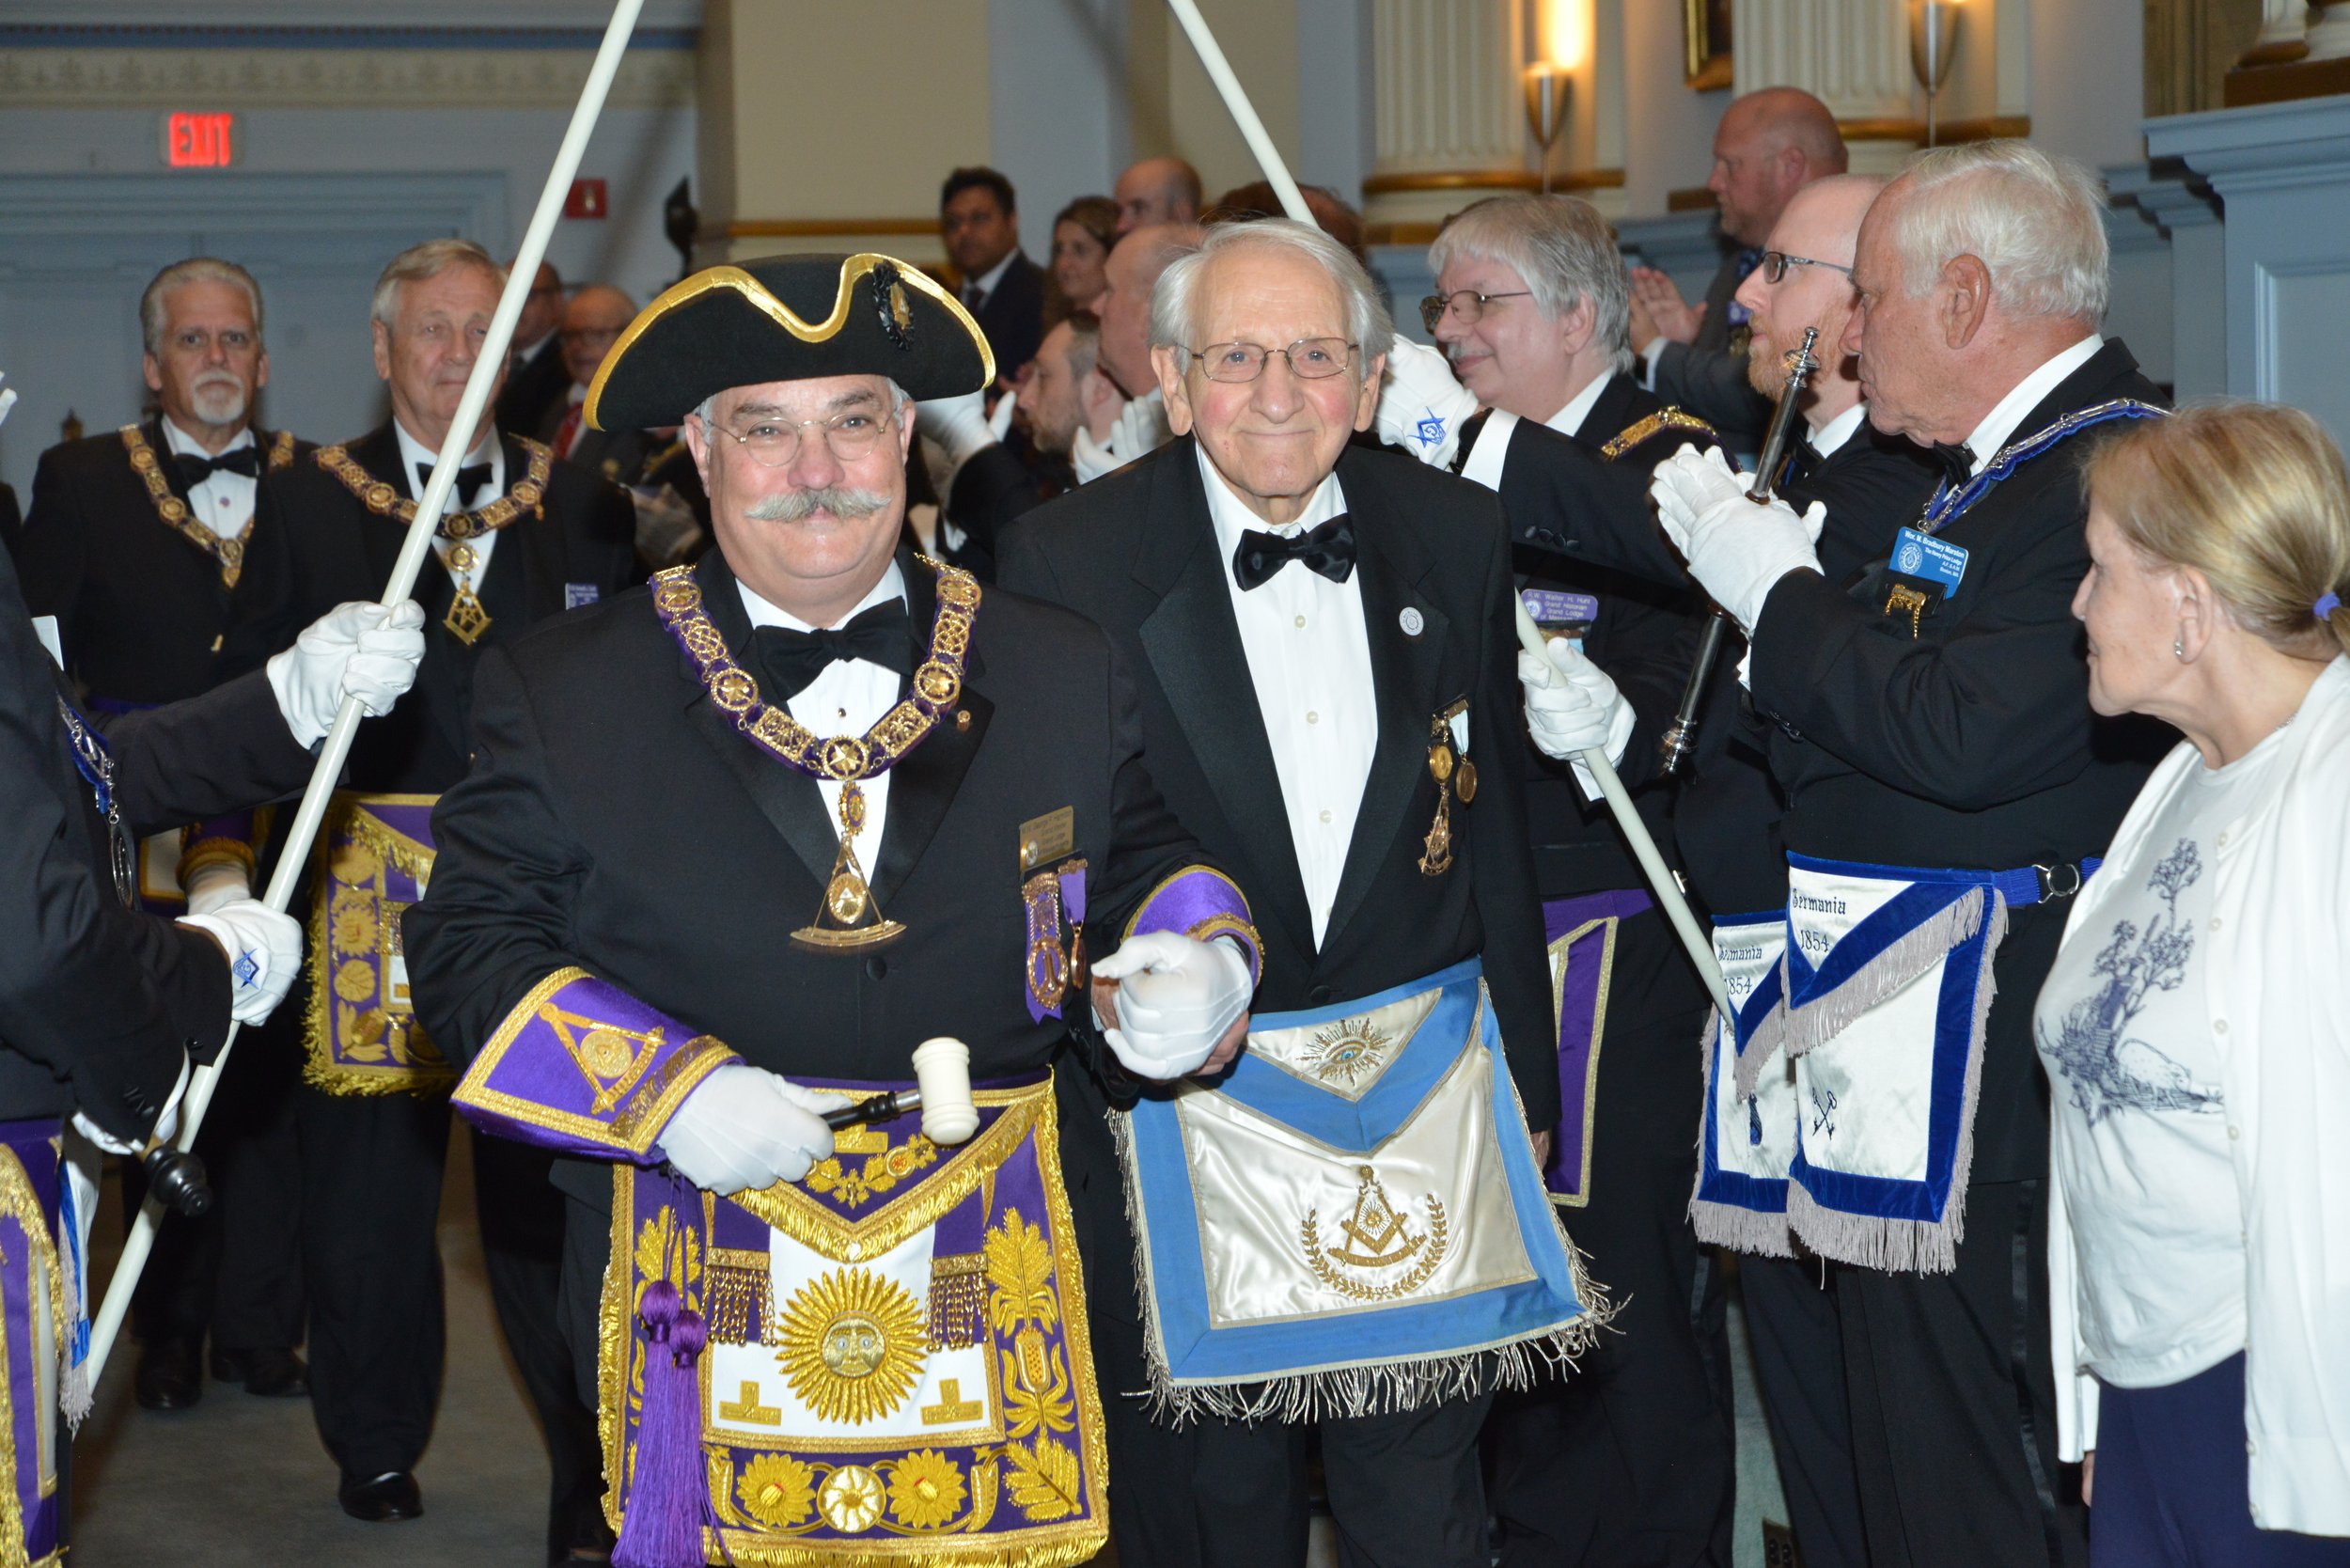  Most Worshipful George F. Hamilton, Grand Master of Masons in Massachusetts, welcomed into The Henry Price Lodge by thunderous applause 